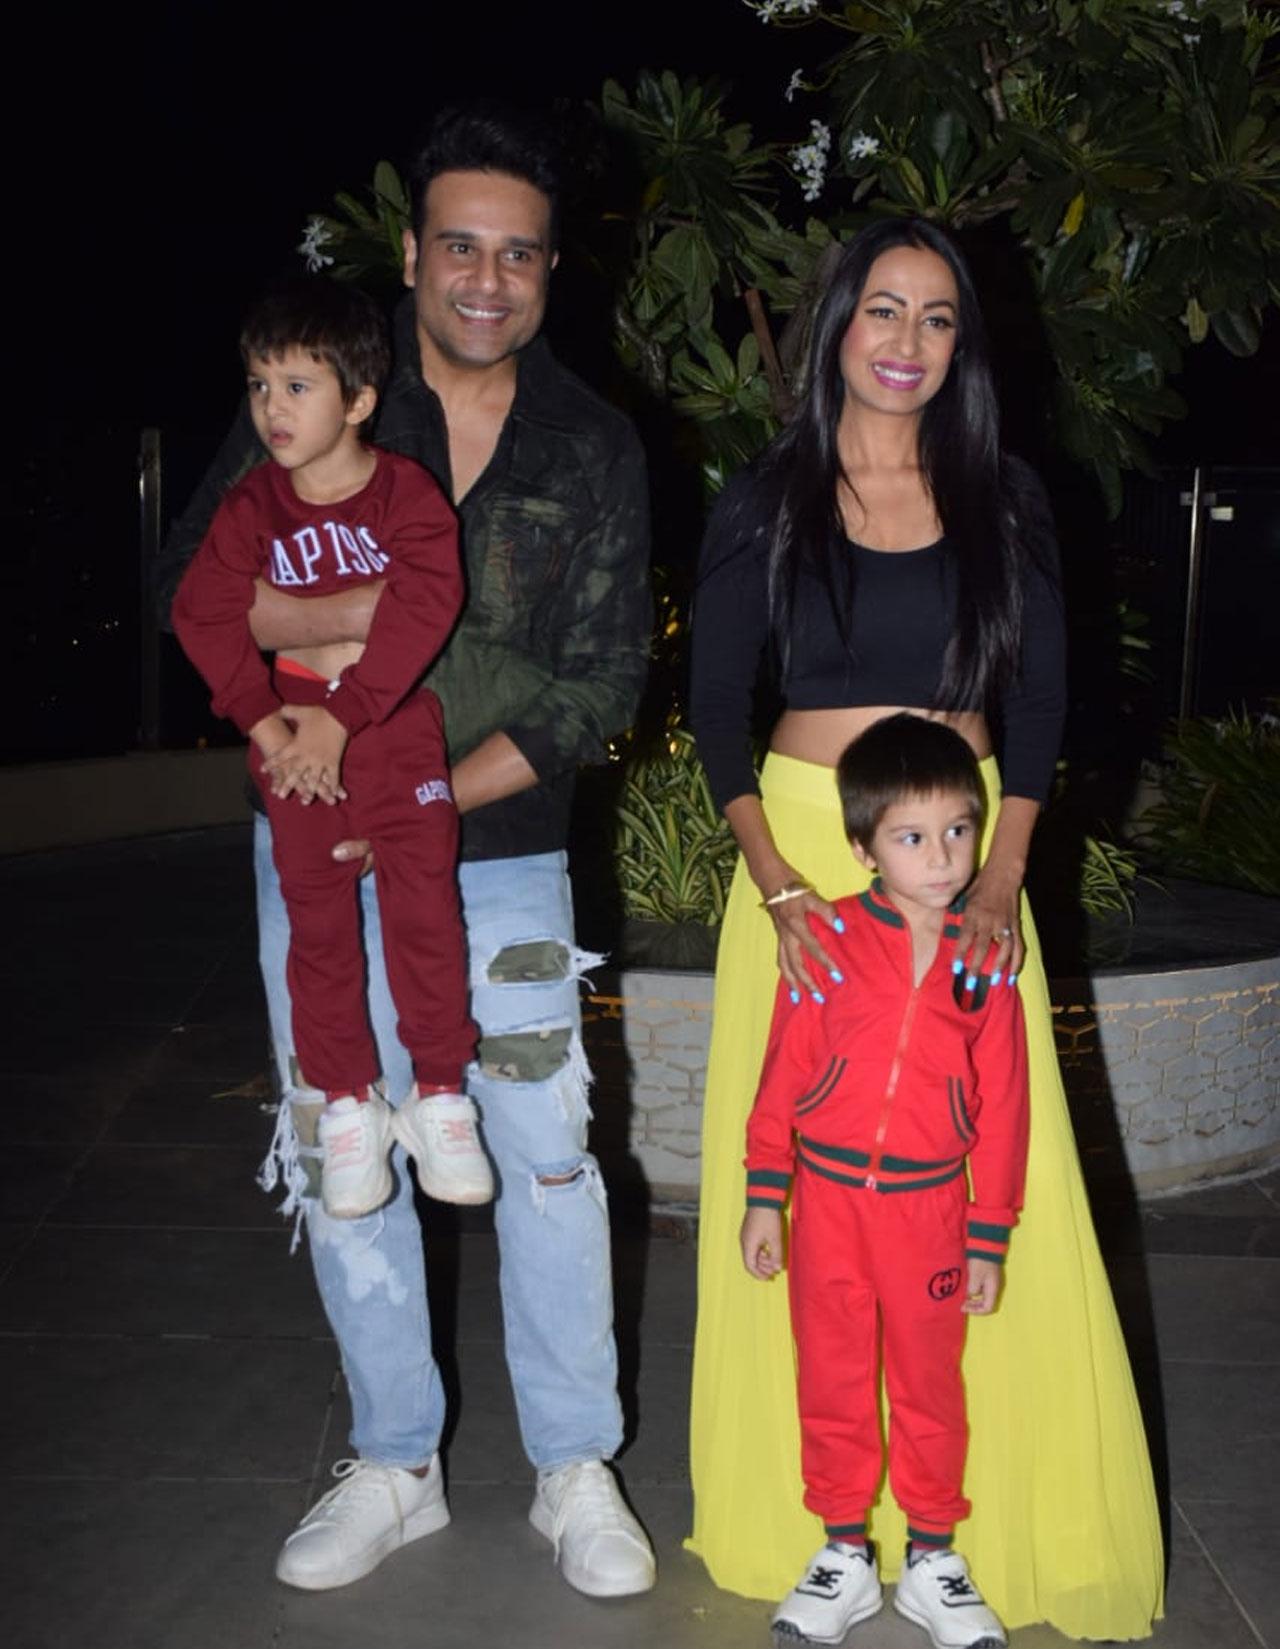 Krushna and Kashmera tied the knot in June 2013. While Krushna is a celebrated artist both in films and television, with names like Bol Bachchan, Entertainment, The Kapil Sharma Show in his repertoire, Kashmera is known for films like Yes Boss, Hera Pheri, and Wake Up Sid.